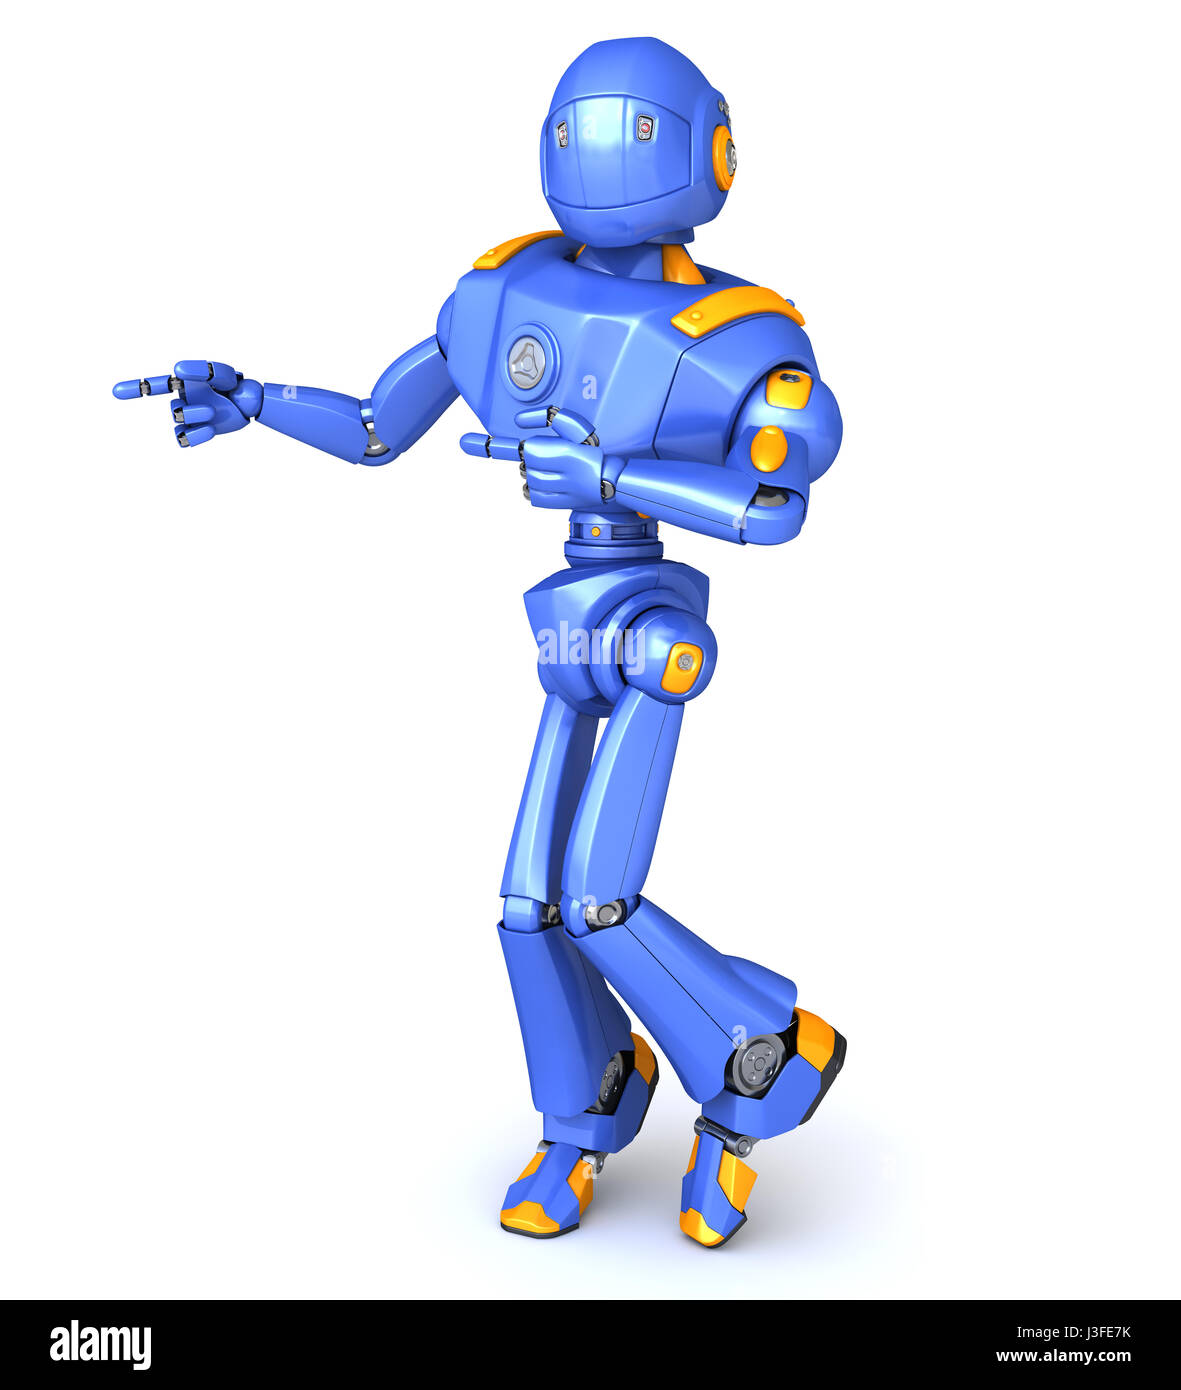 Cute robot character pointing something Stock Photo